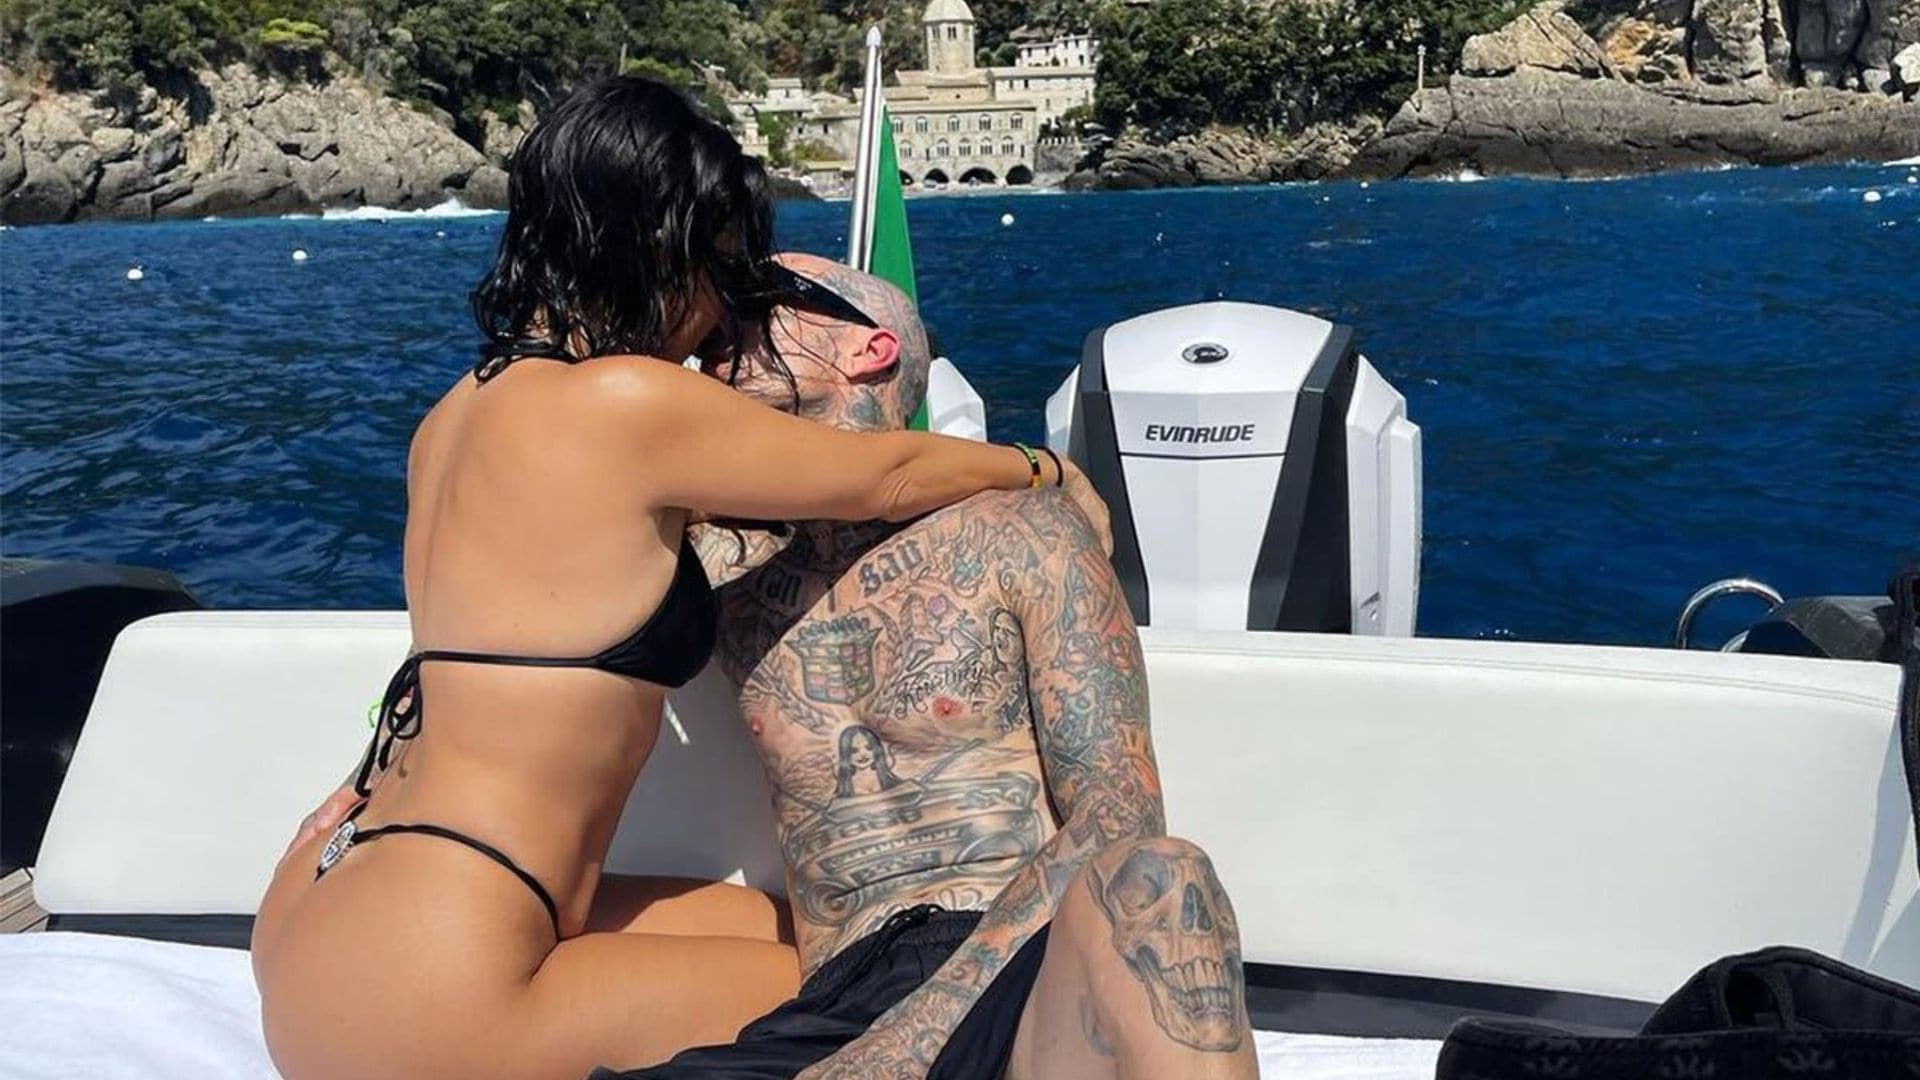 Kourtney Kardashian and Travis Barker are living their best lives in Italy together